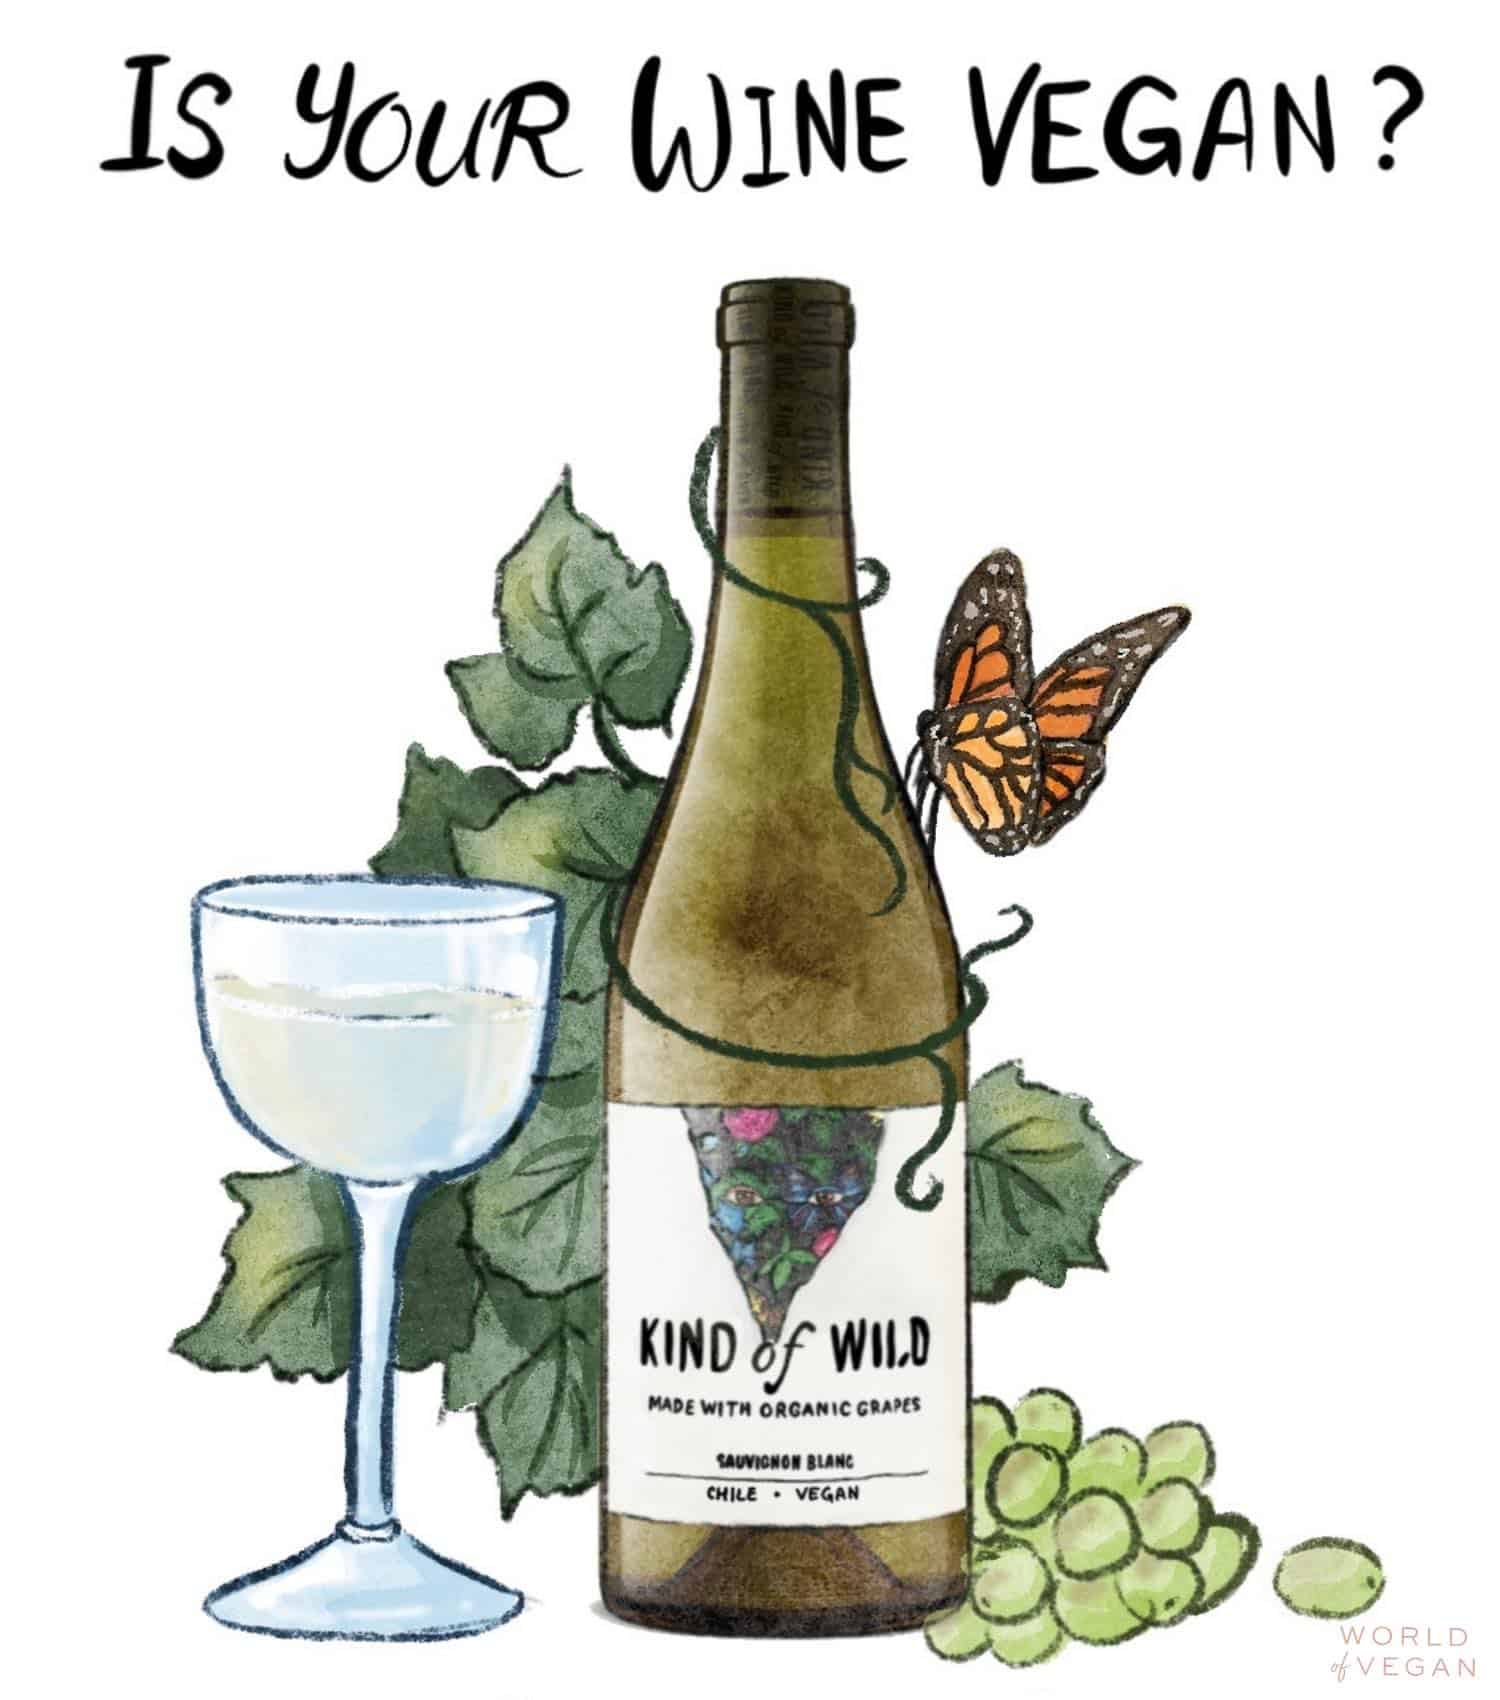 kind of wild bottle of organic vegan wine illustrated with grapes vines and a butterfly